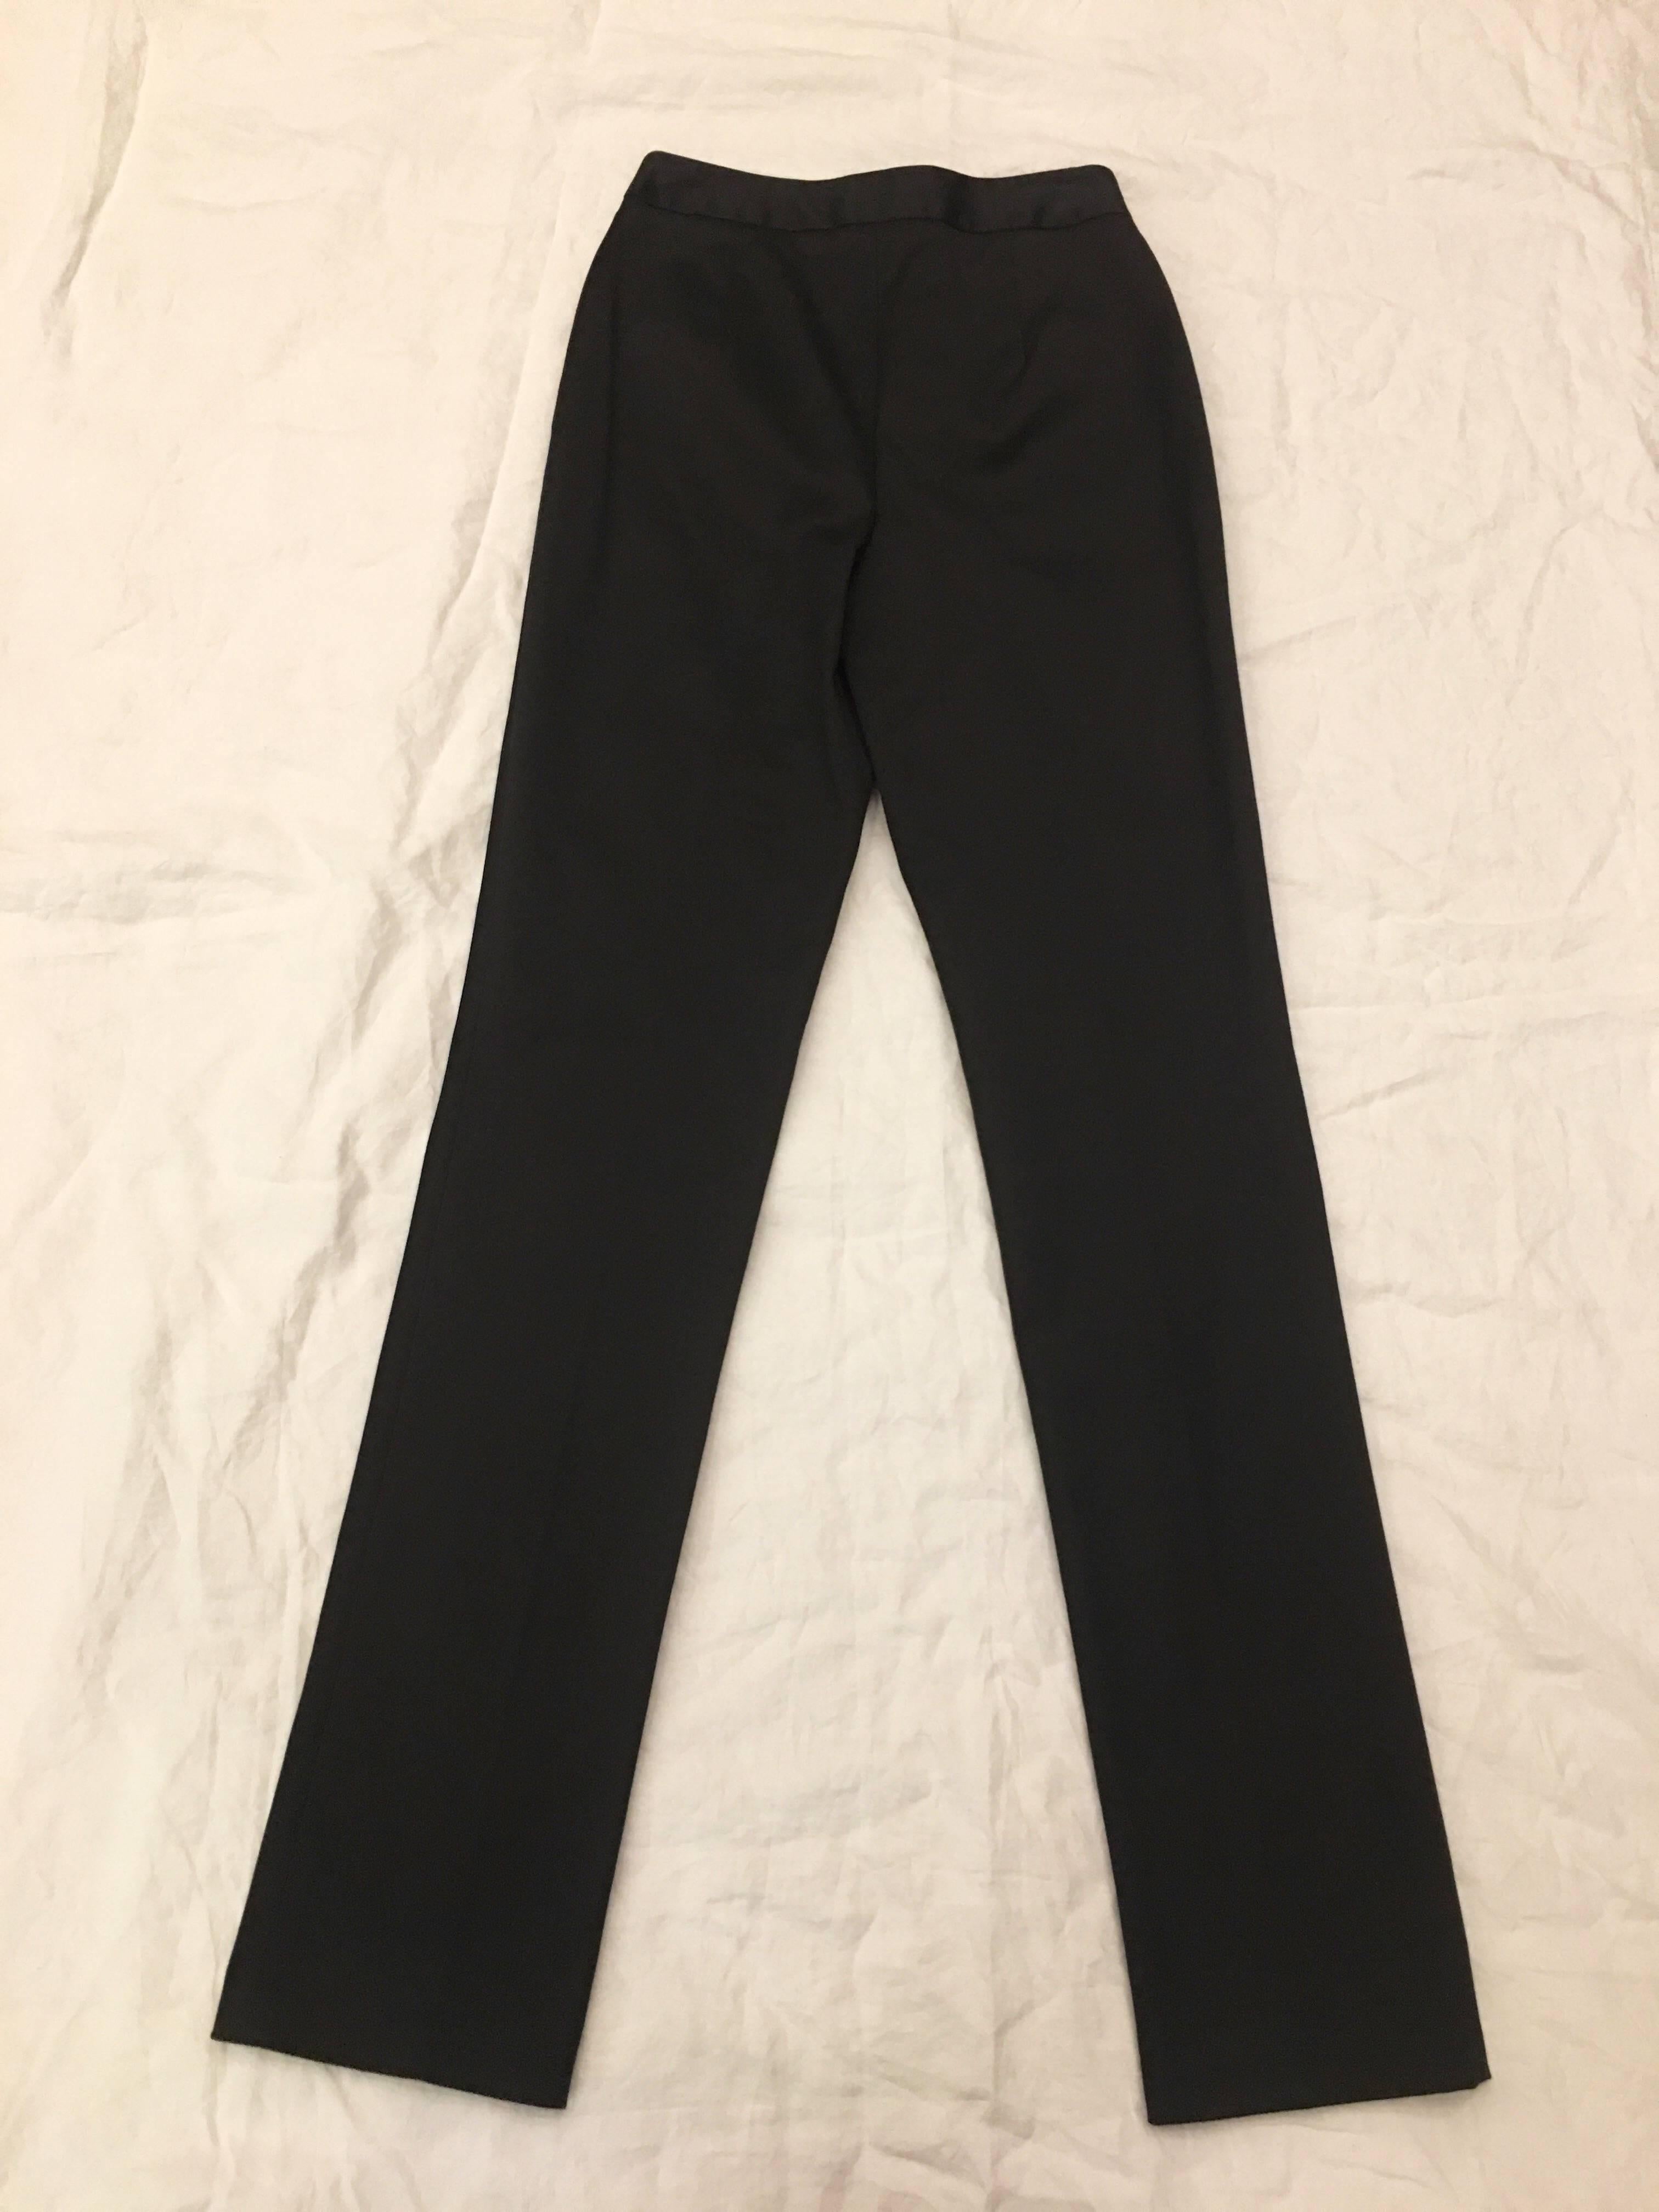 Black straight leg pants by Dolce and Gabbana. Two front pockets at waist. Dress them up or down. A versatile every day pant for office wear or casual day off errands. 